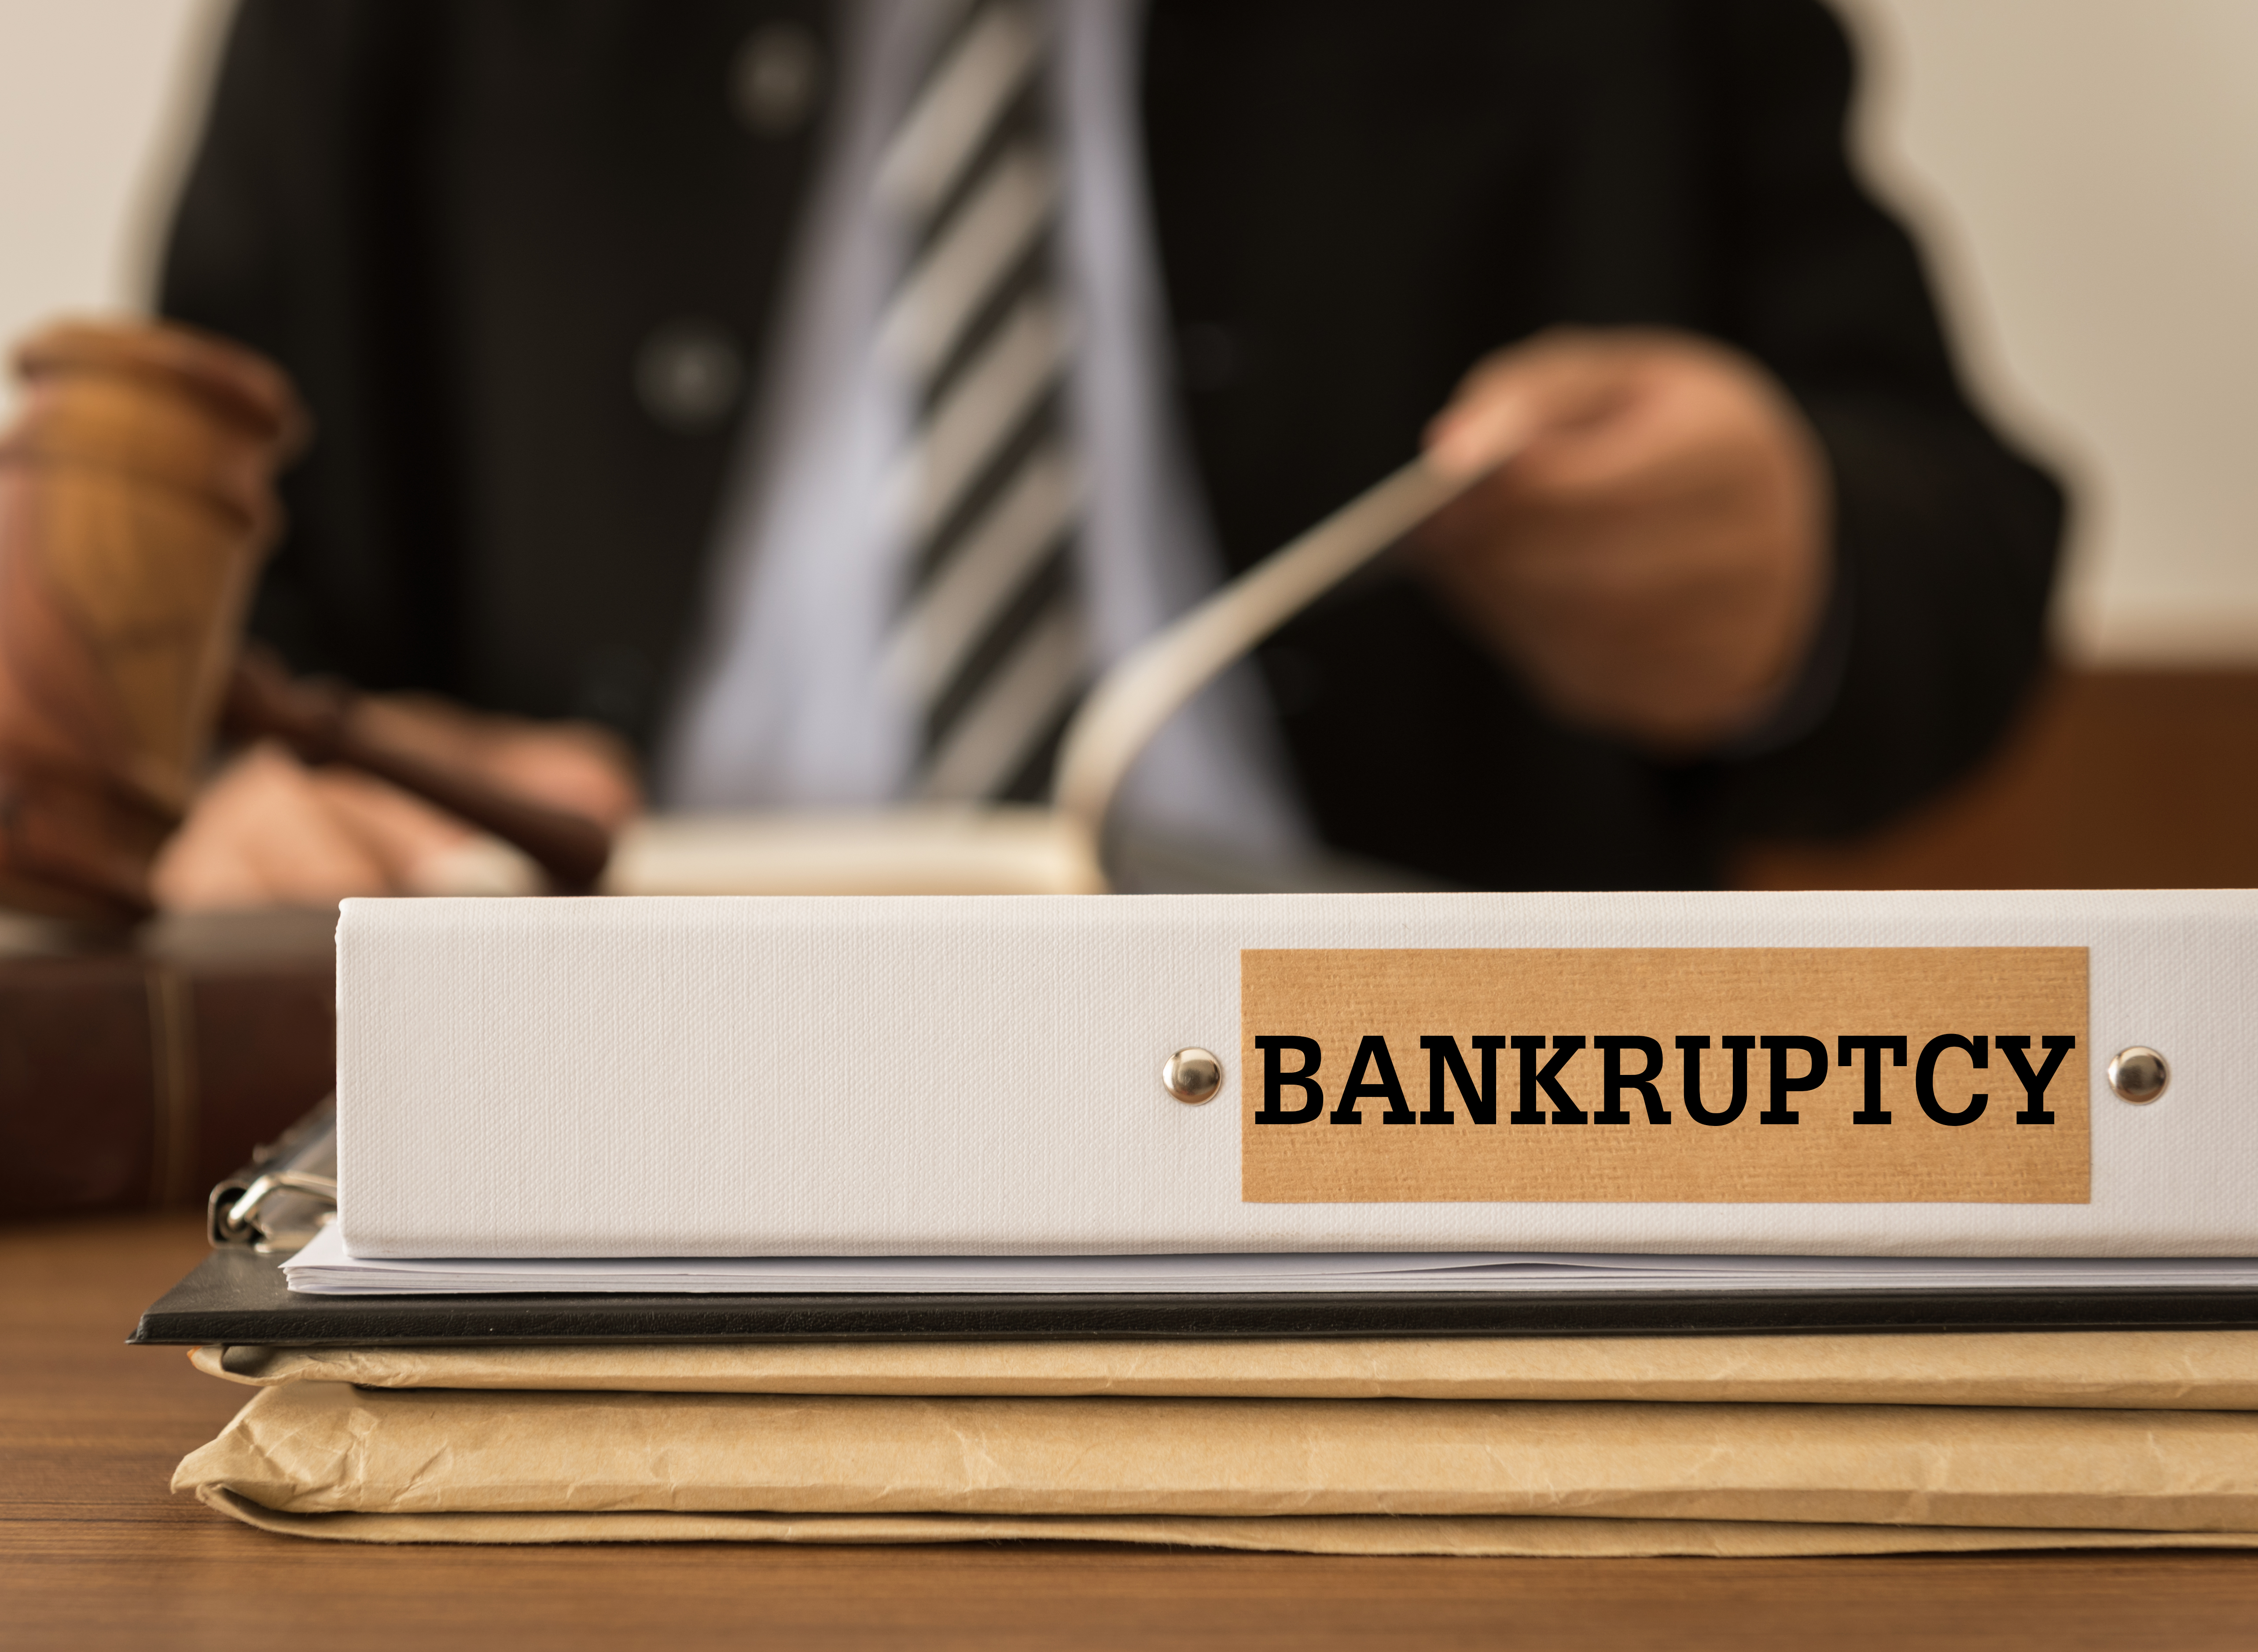 Start Your California Bankruptcy Now With Price Law Group Call 866-210-1722